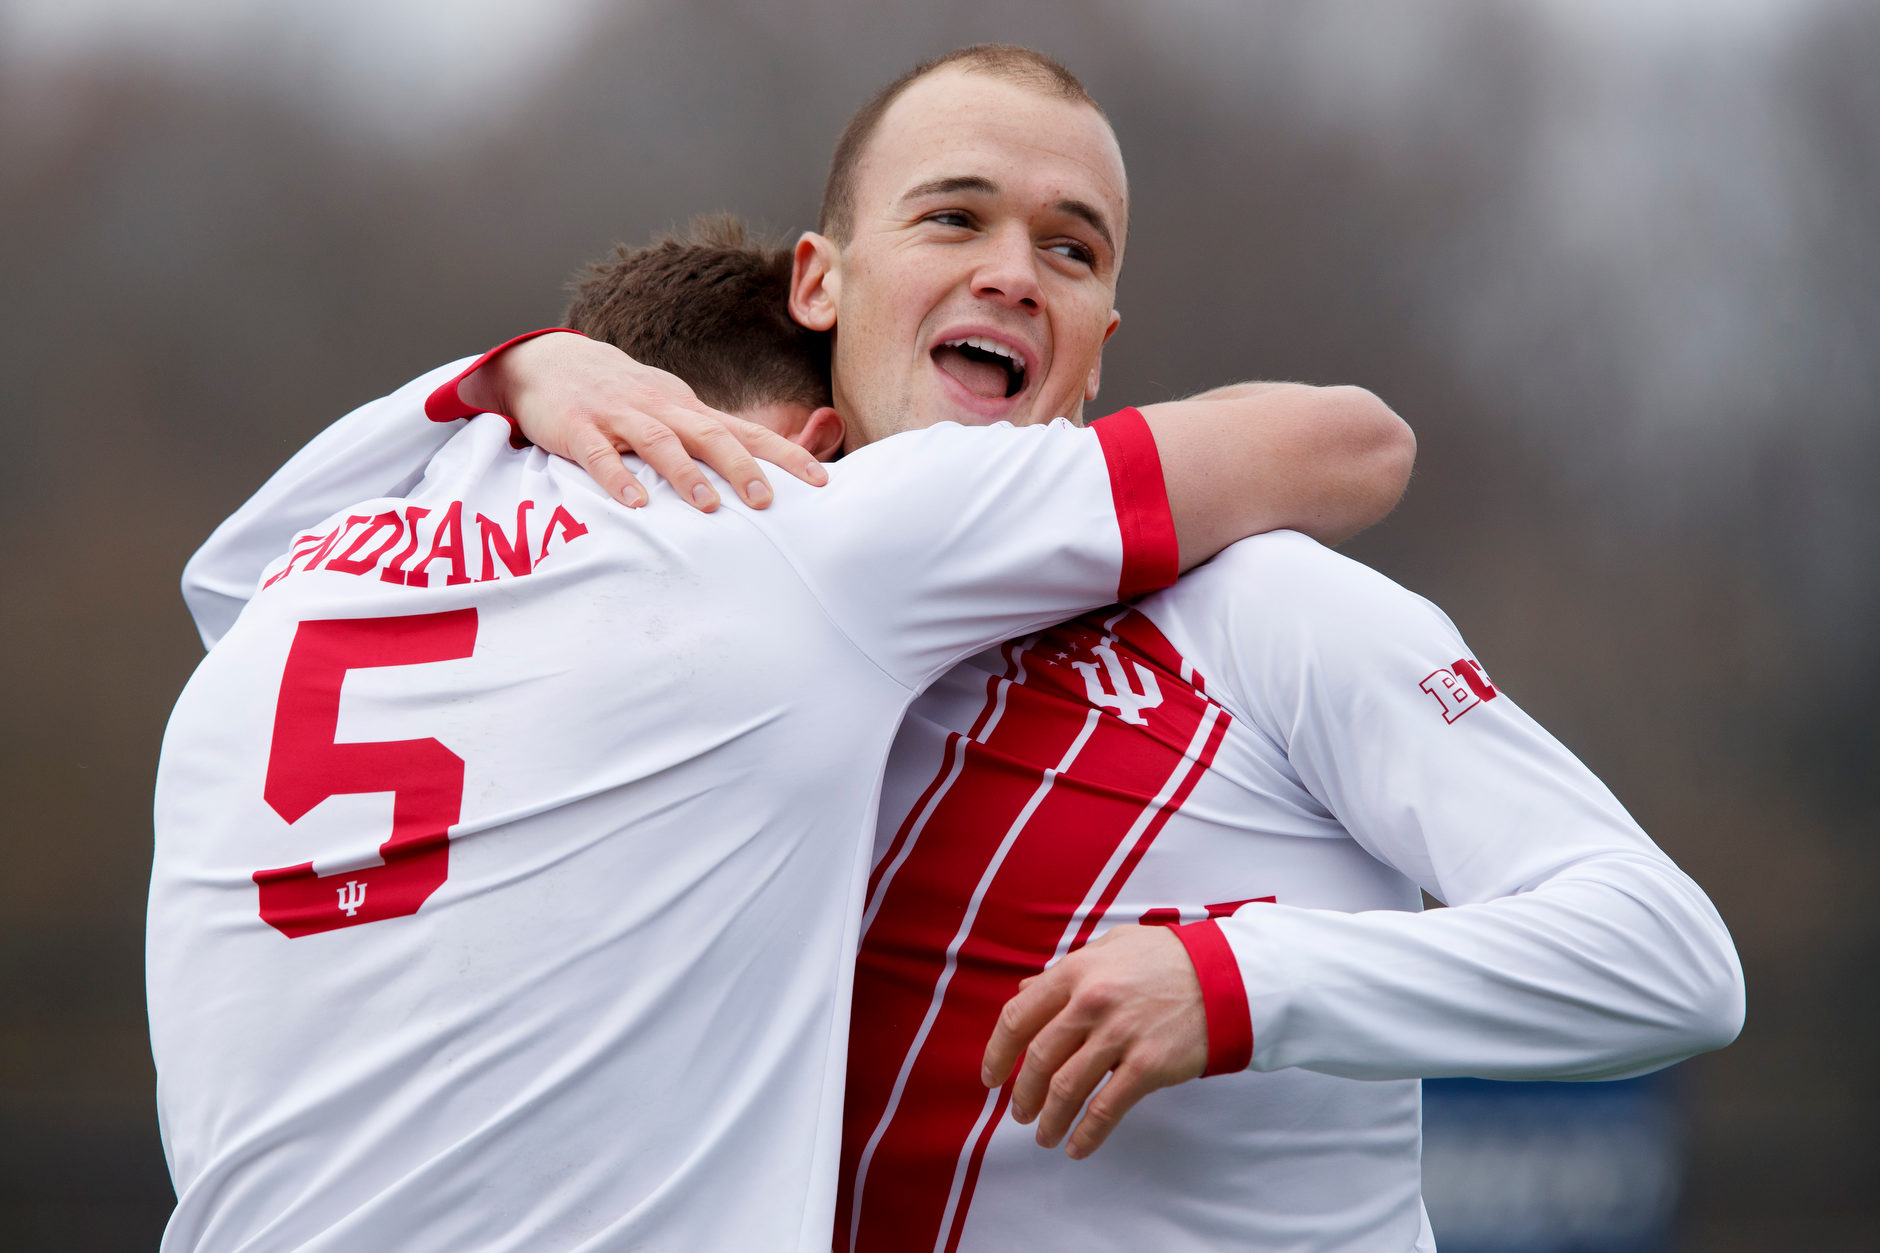 Indiana's Andrew Gutman, right, celebrates with Timmy Mehl (5) after scoring a goal during the first half of an NCAA men's soccer tournament match at Bill Armstrong Stadium in Bloomington, Ind. on Sunday, Nov. 18, 2018. (James Brosher for The Herald-Times)